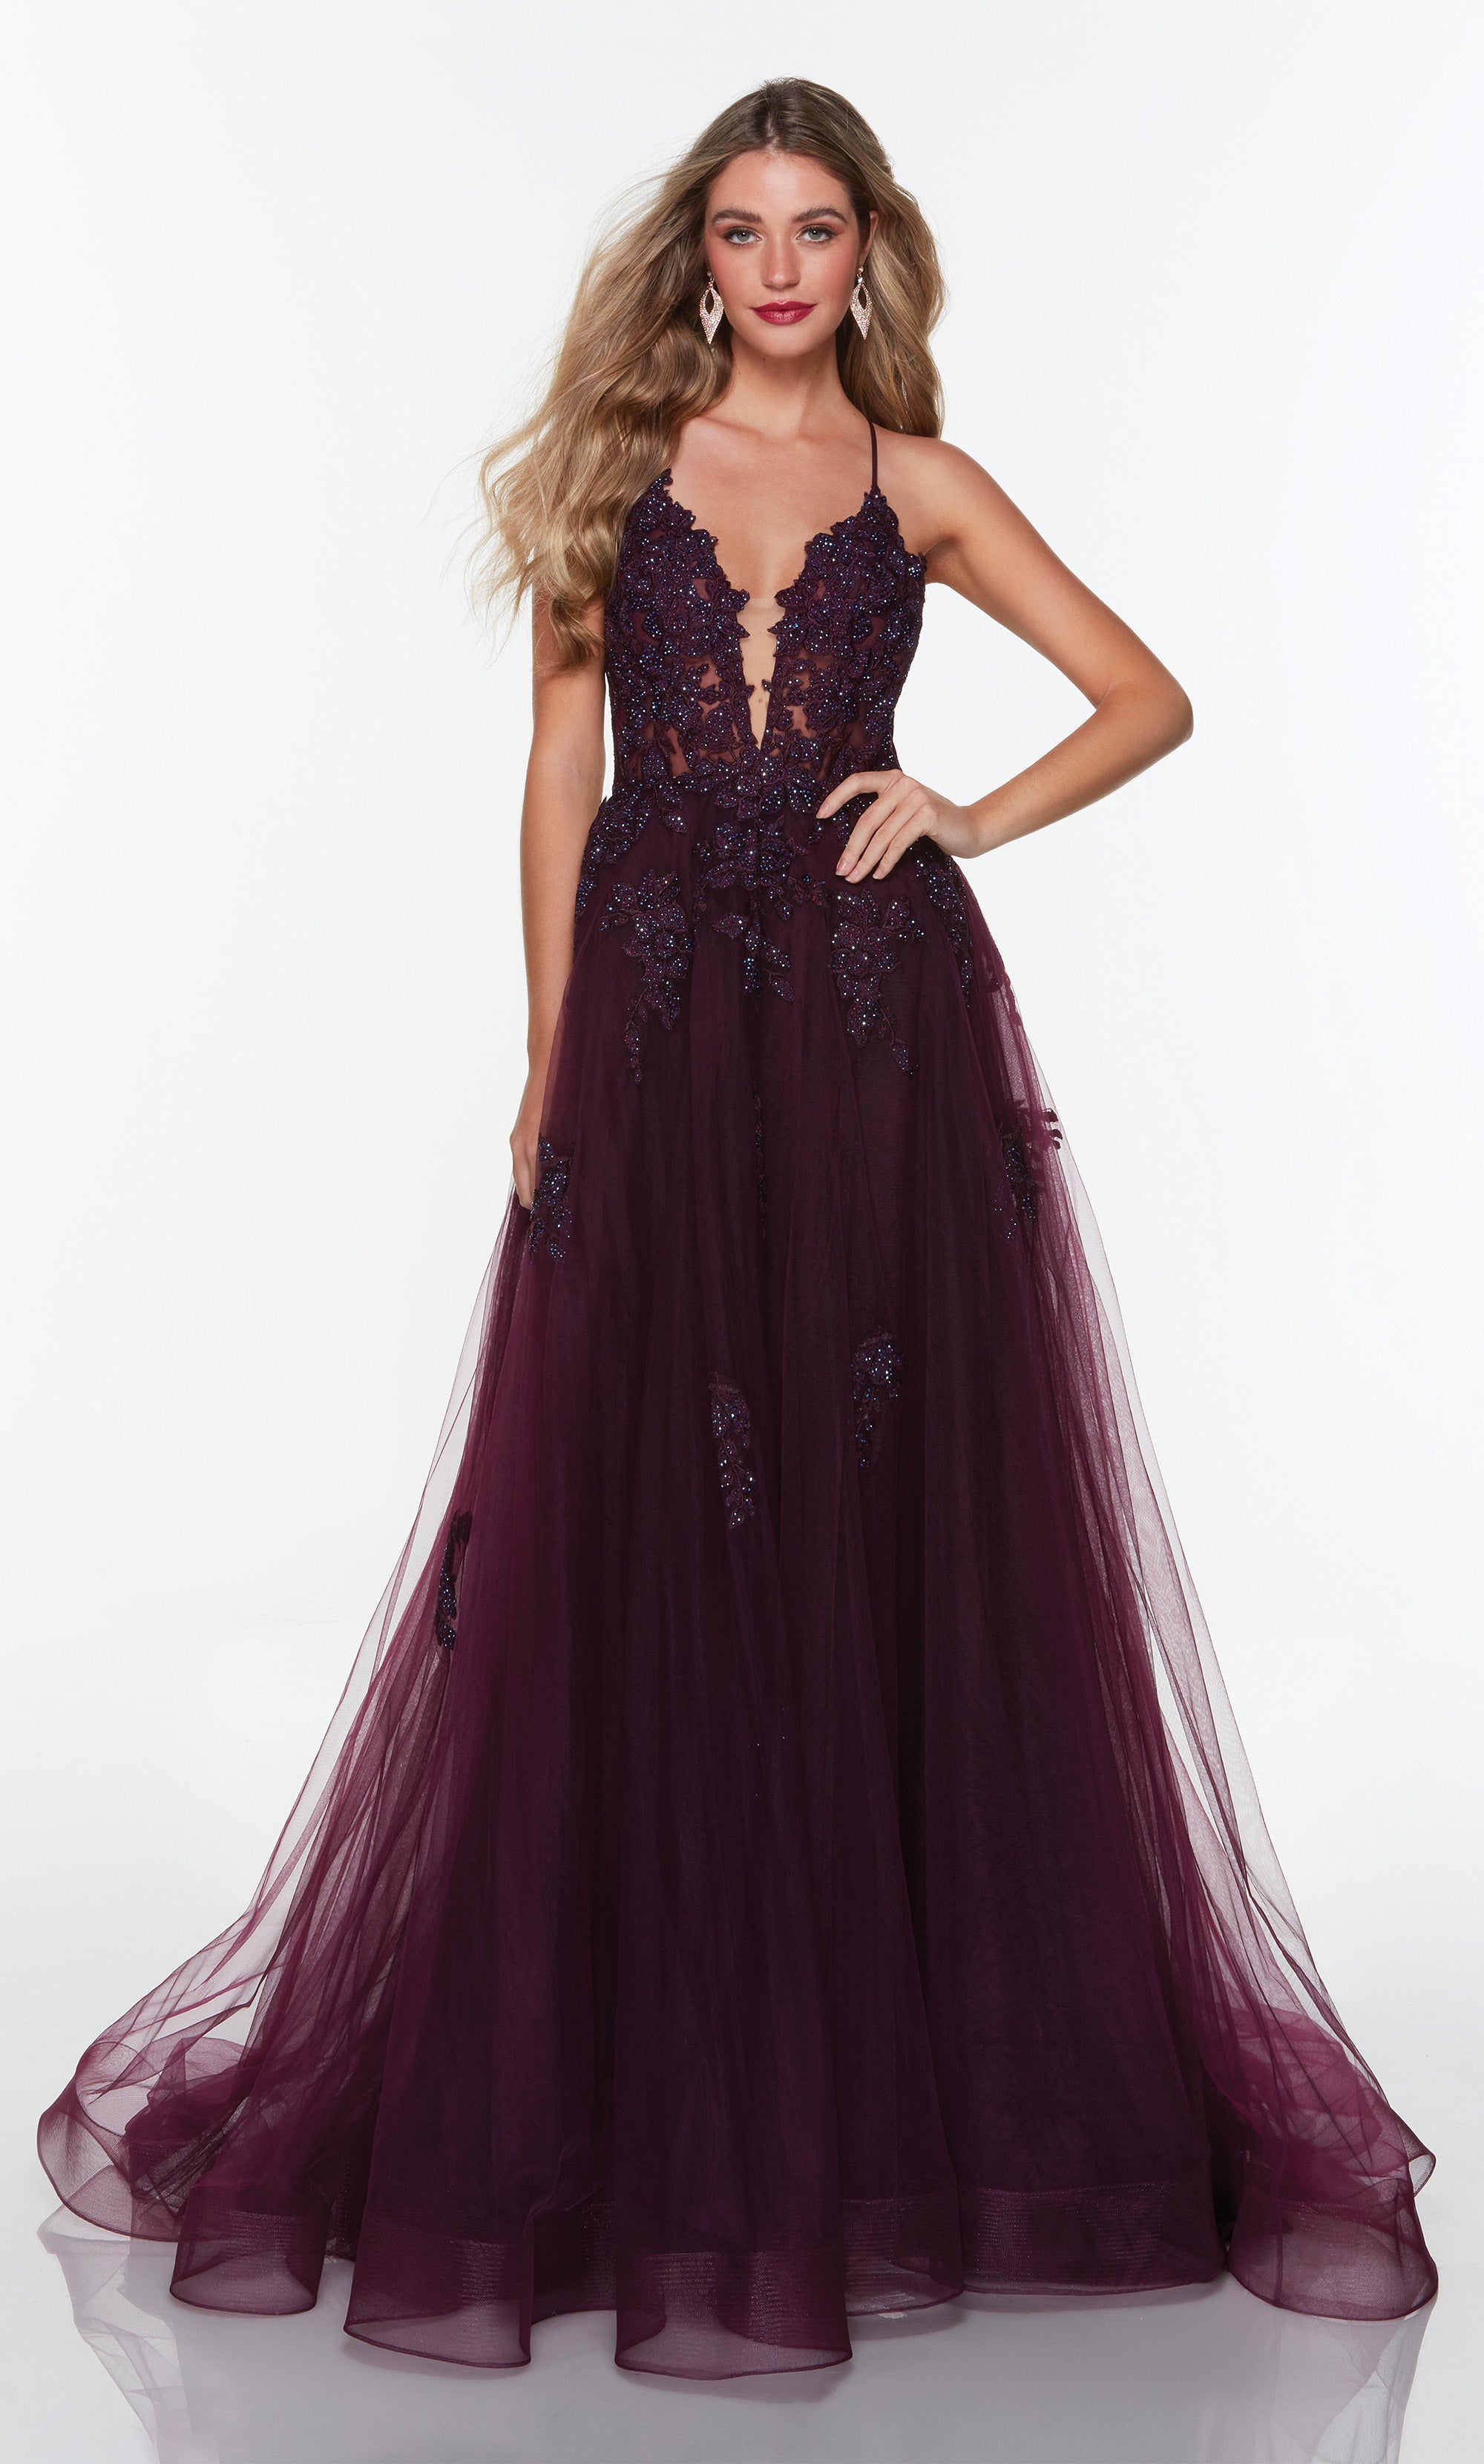 Tulle prom dress with a plunging neckline and floral appliques in black plum. Color-SWATCH_61263__BLACK-PLUM